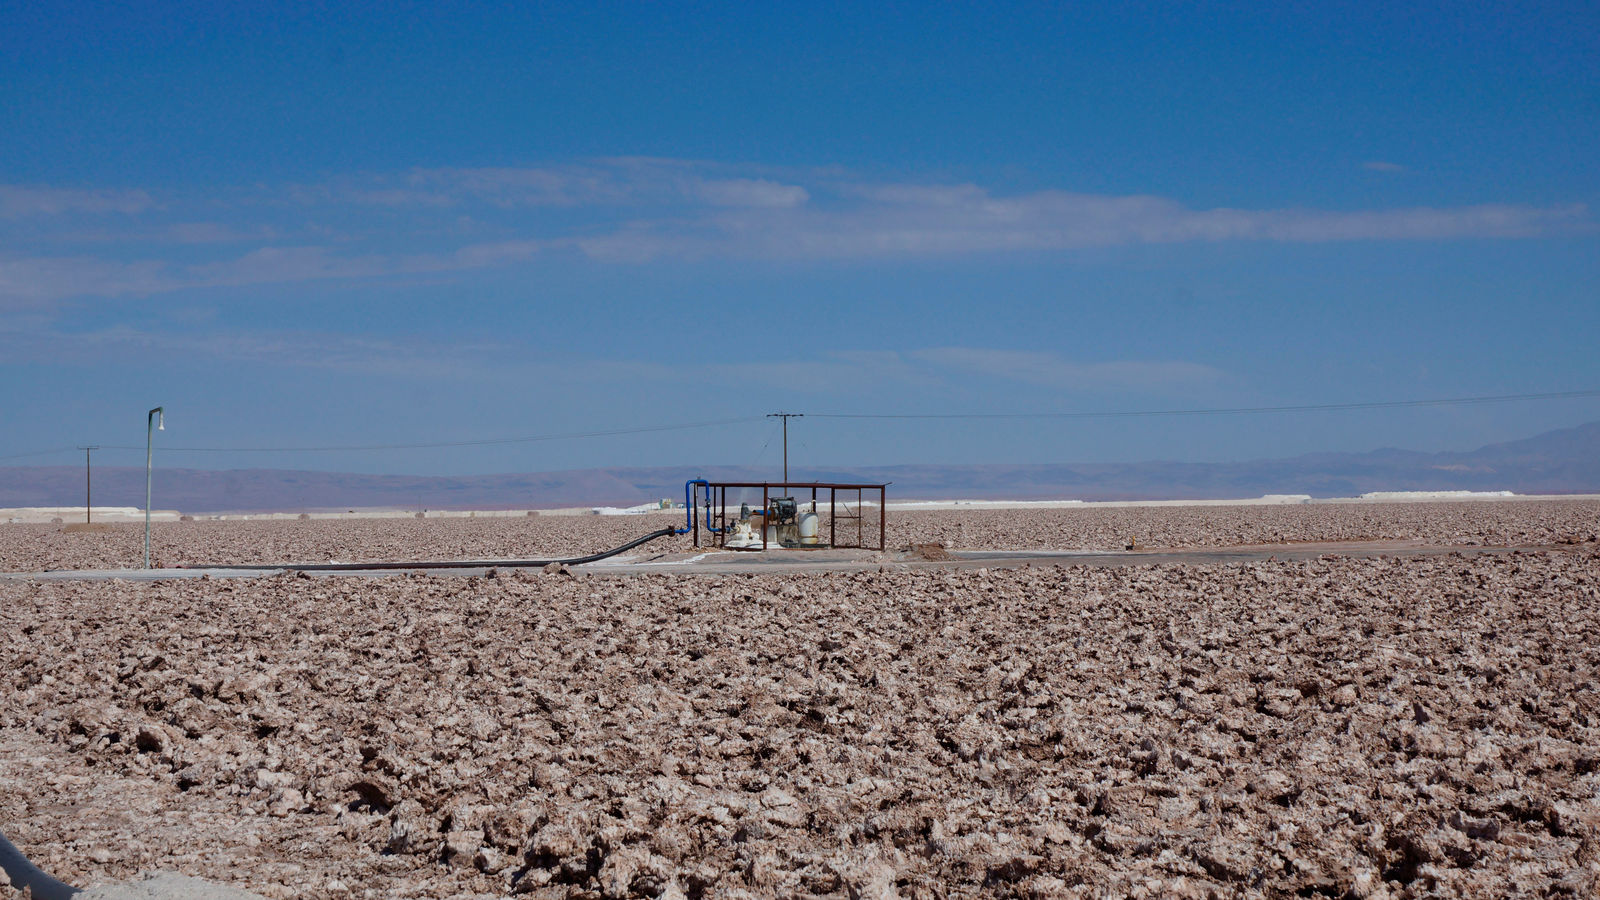 Story: "Fact-finding expedition to the lithium desert of Chile"